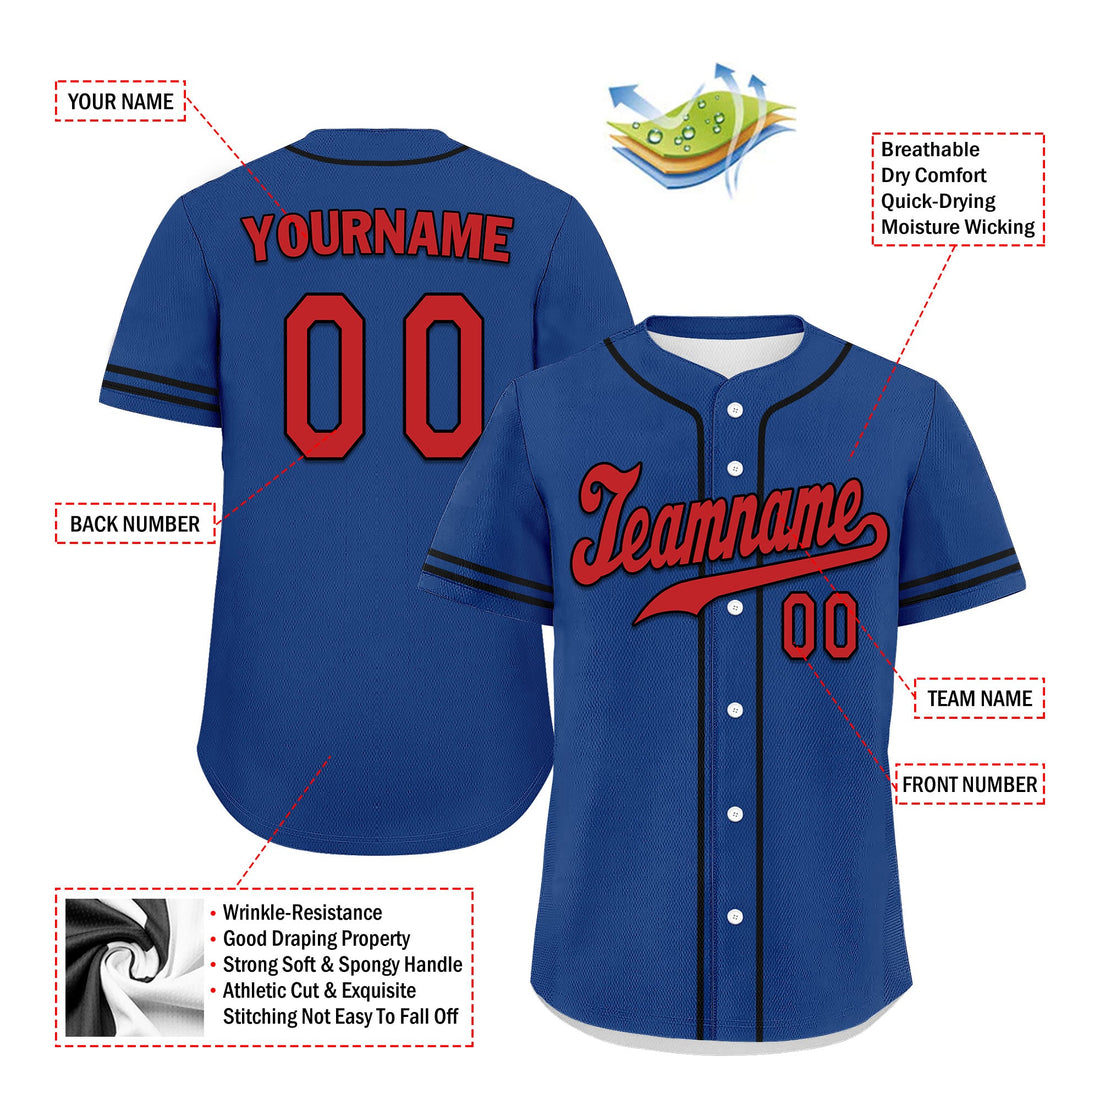 Custom Blue Classic Style Red Personalized Authentic Baseball Jersey UN002-bd0b00d8-a0